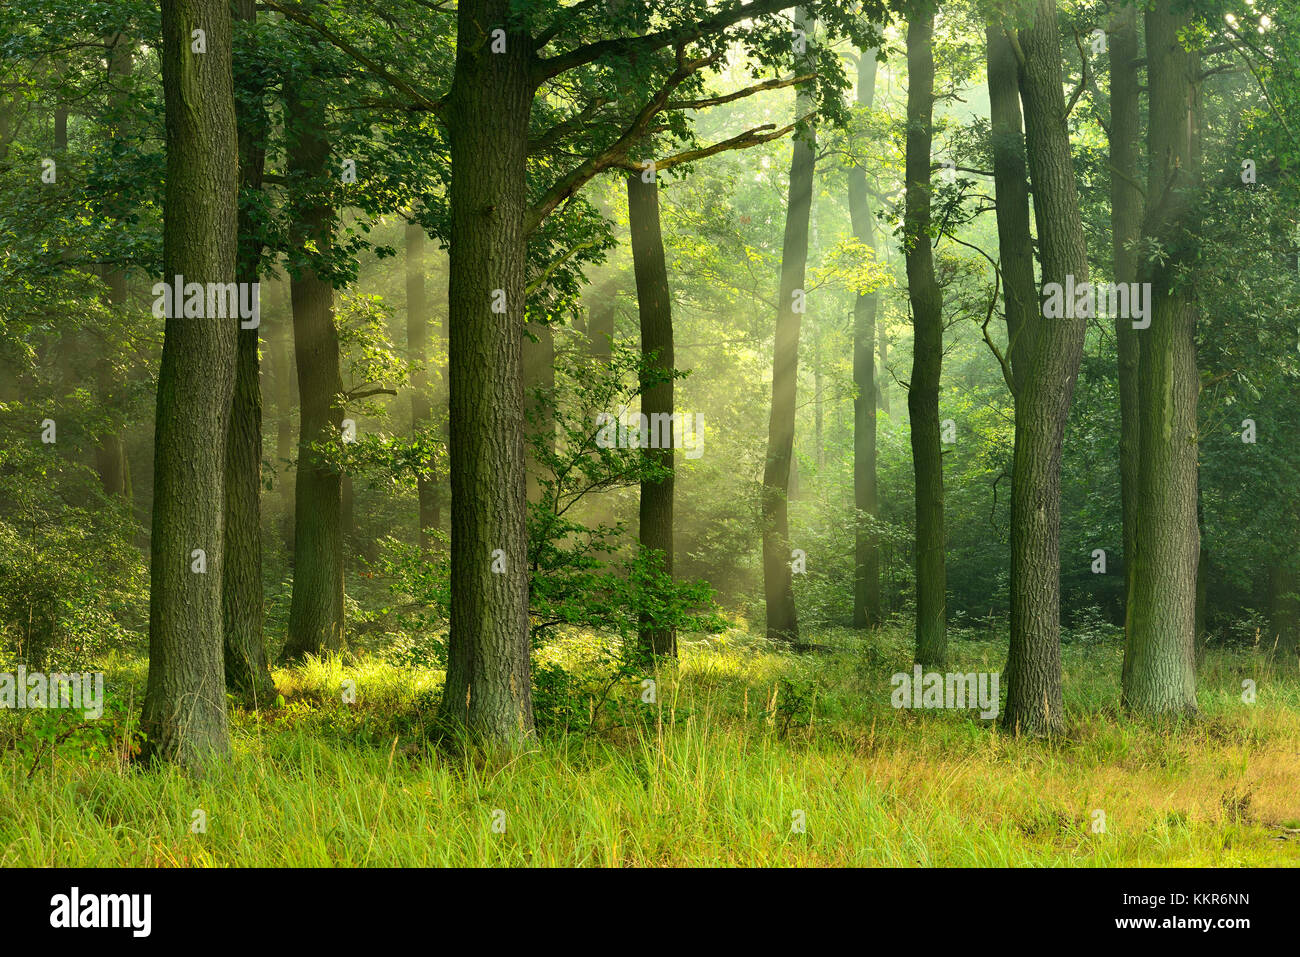 Close-to-nature oak wood flooded with light, Ziegelrodaer Forst, near Querfurt, Saxony-Anhalt, Germany Stock Photo